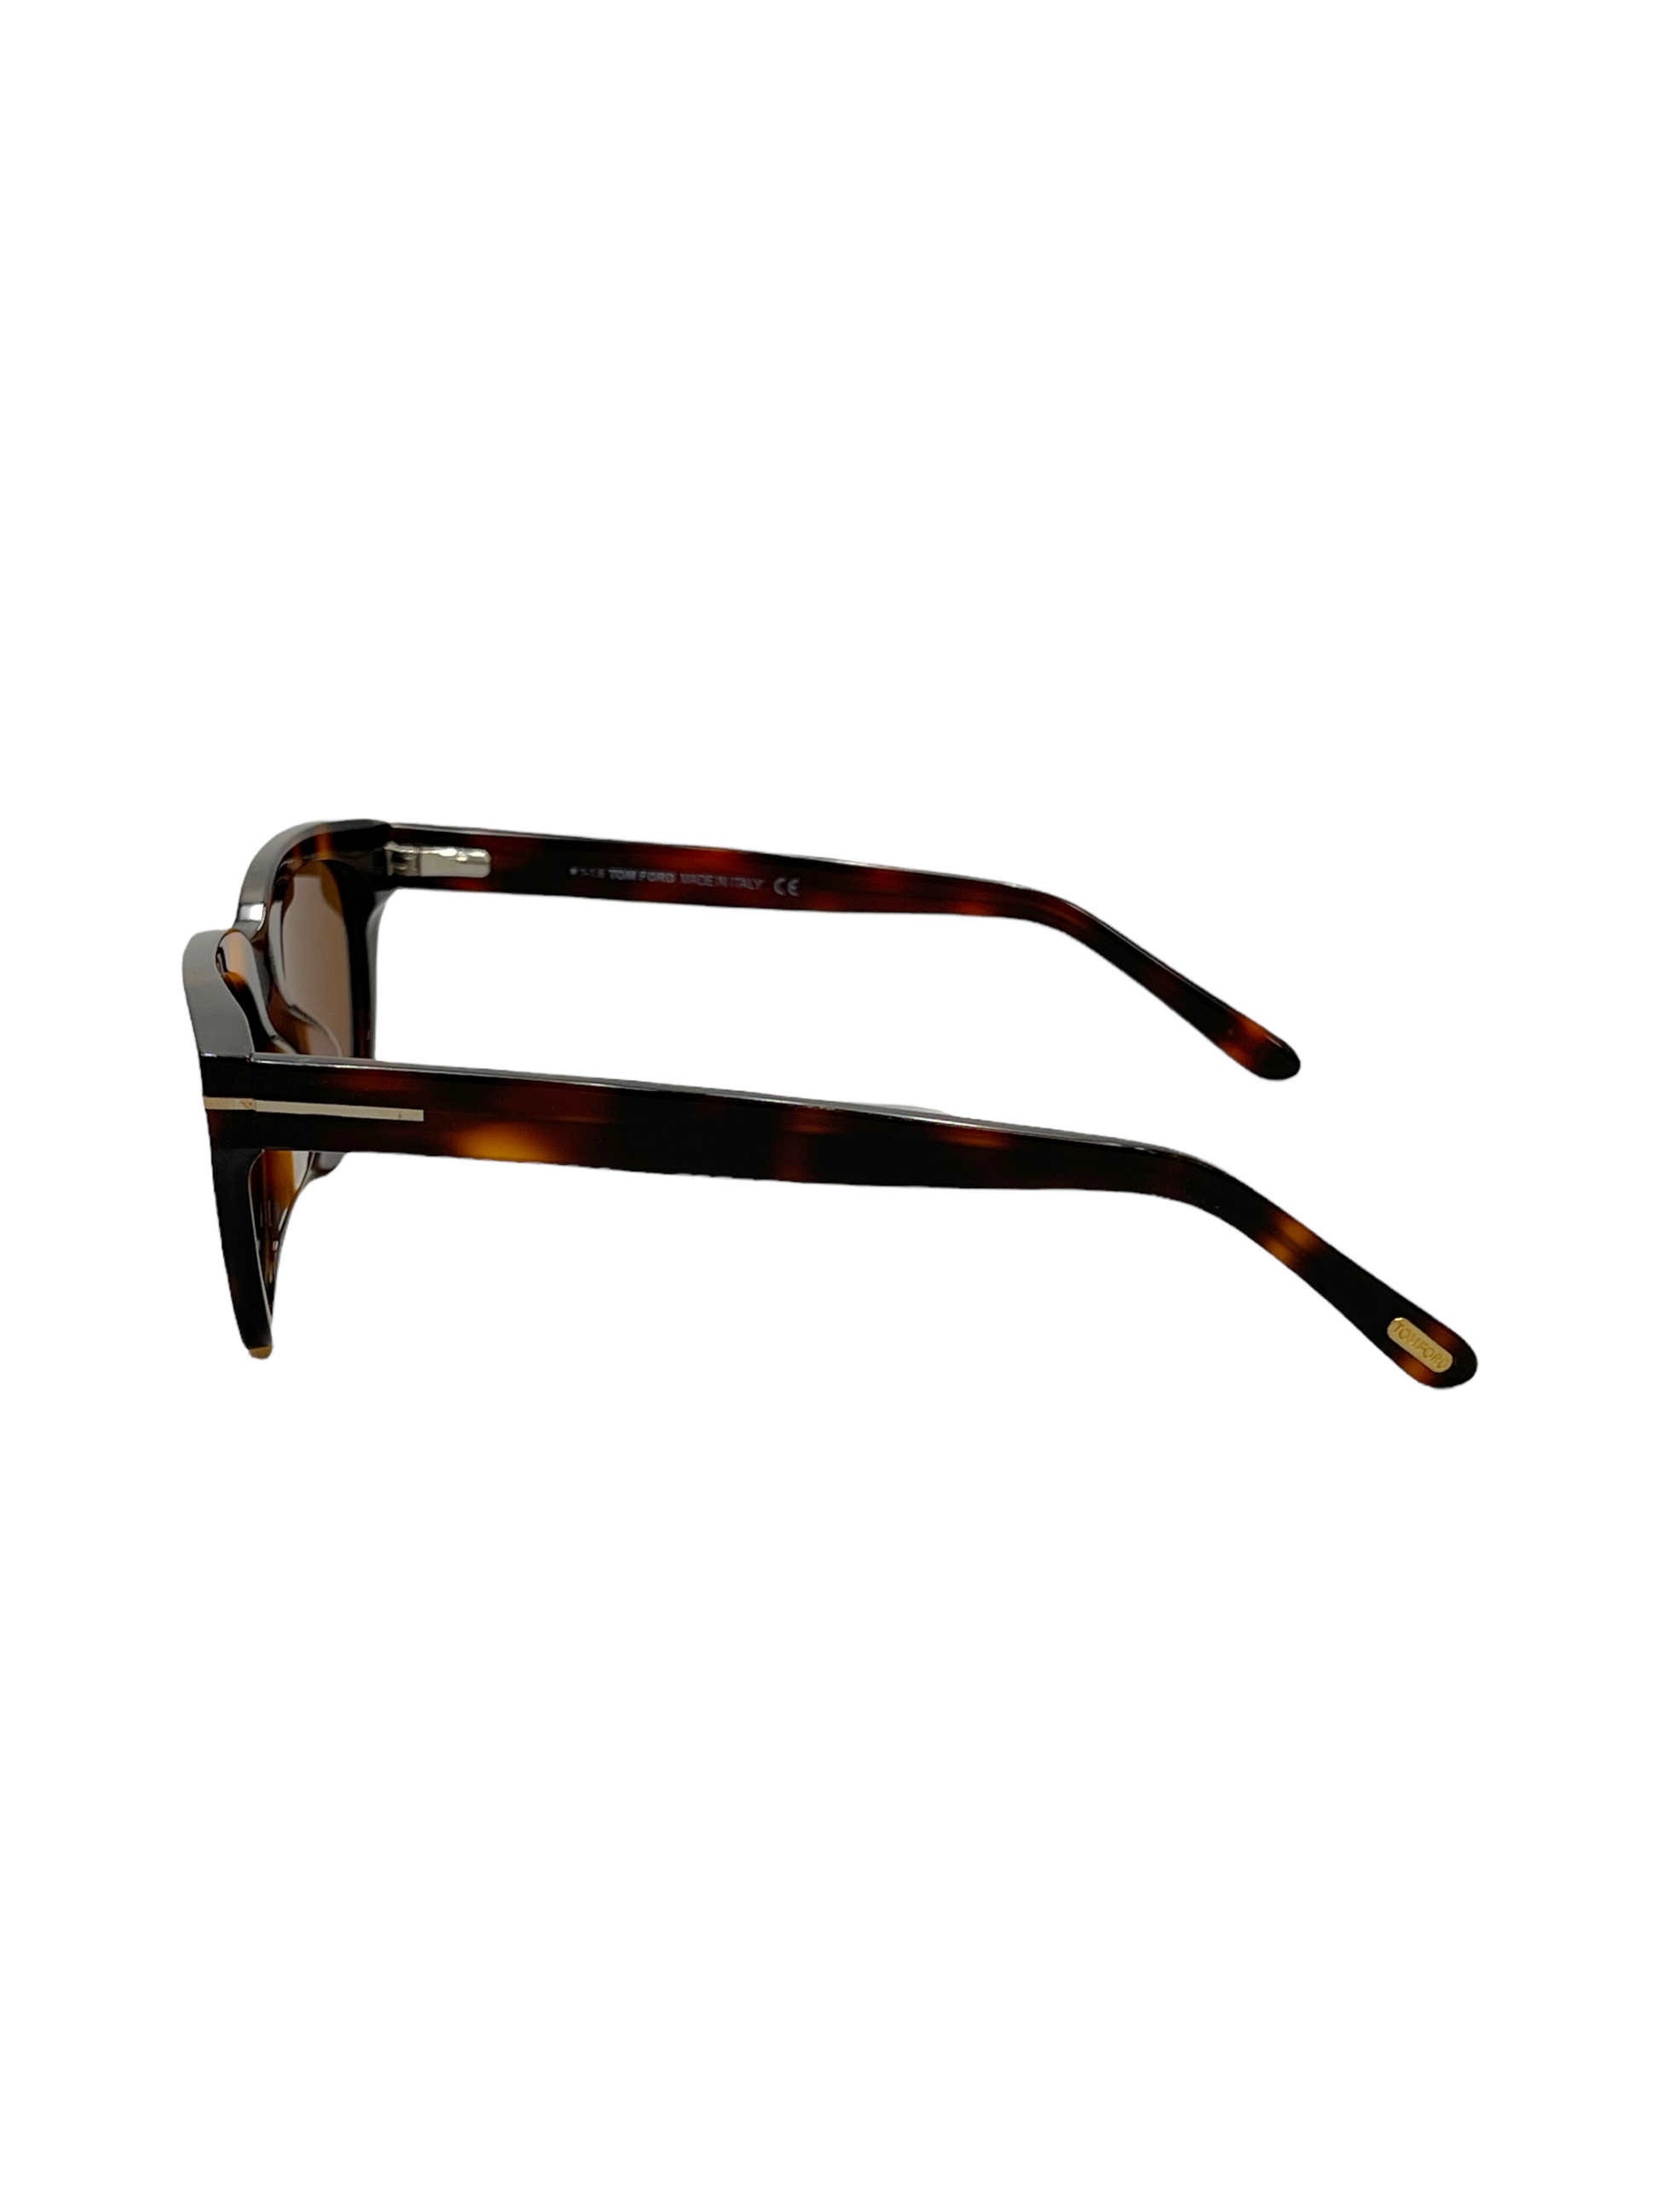 TOM FORD Brown Tortoise Shell Snowdon Sunglasses 52 - Genuine Design Luxury Consignment for Men. New & Pre-Owned Clothing, Shoes, & Accessories. Calgary, Canada